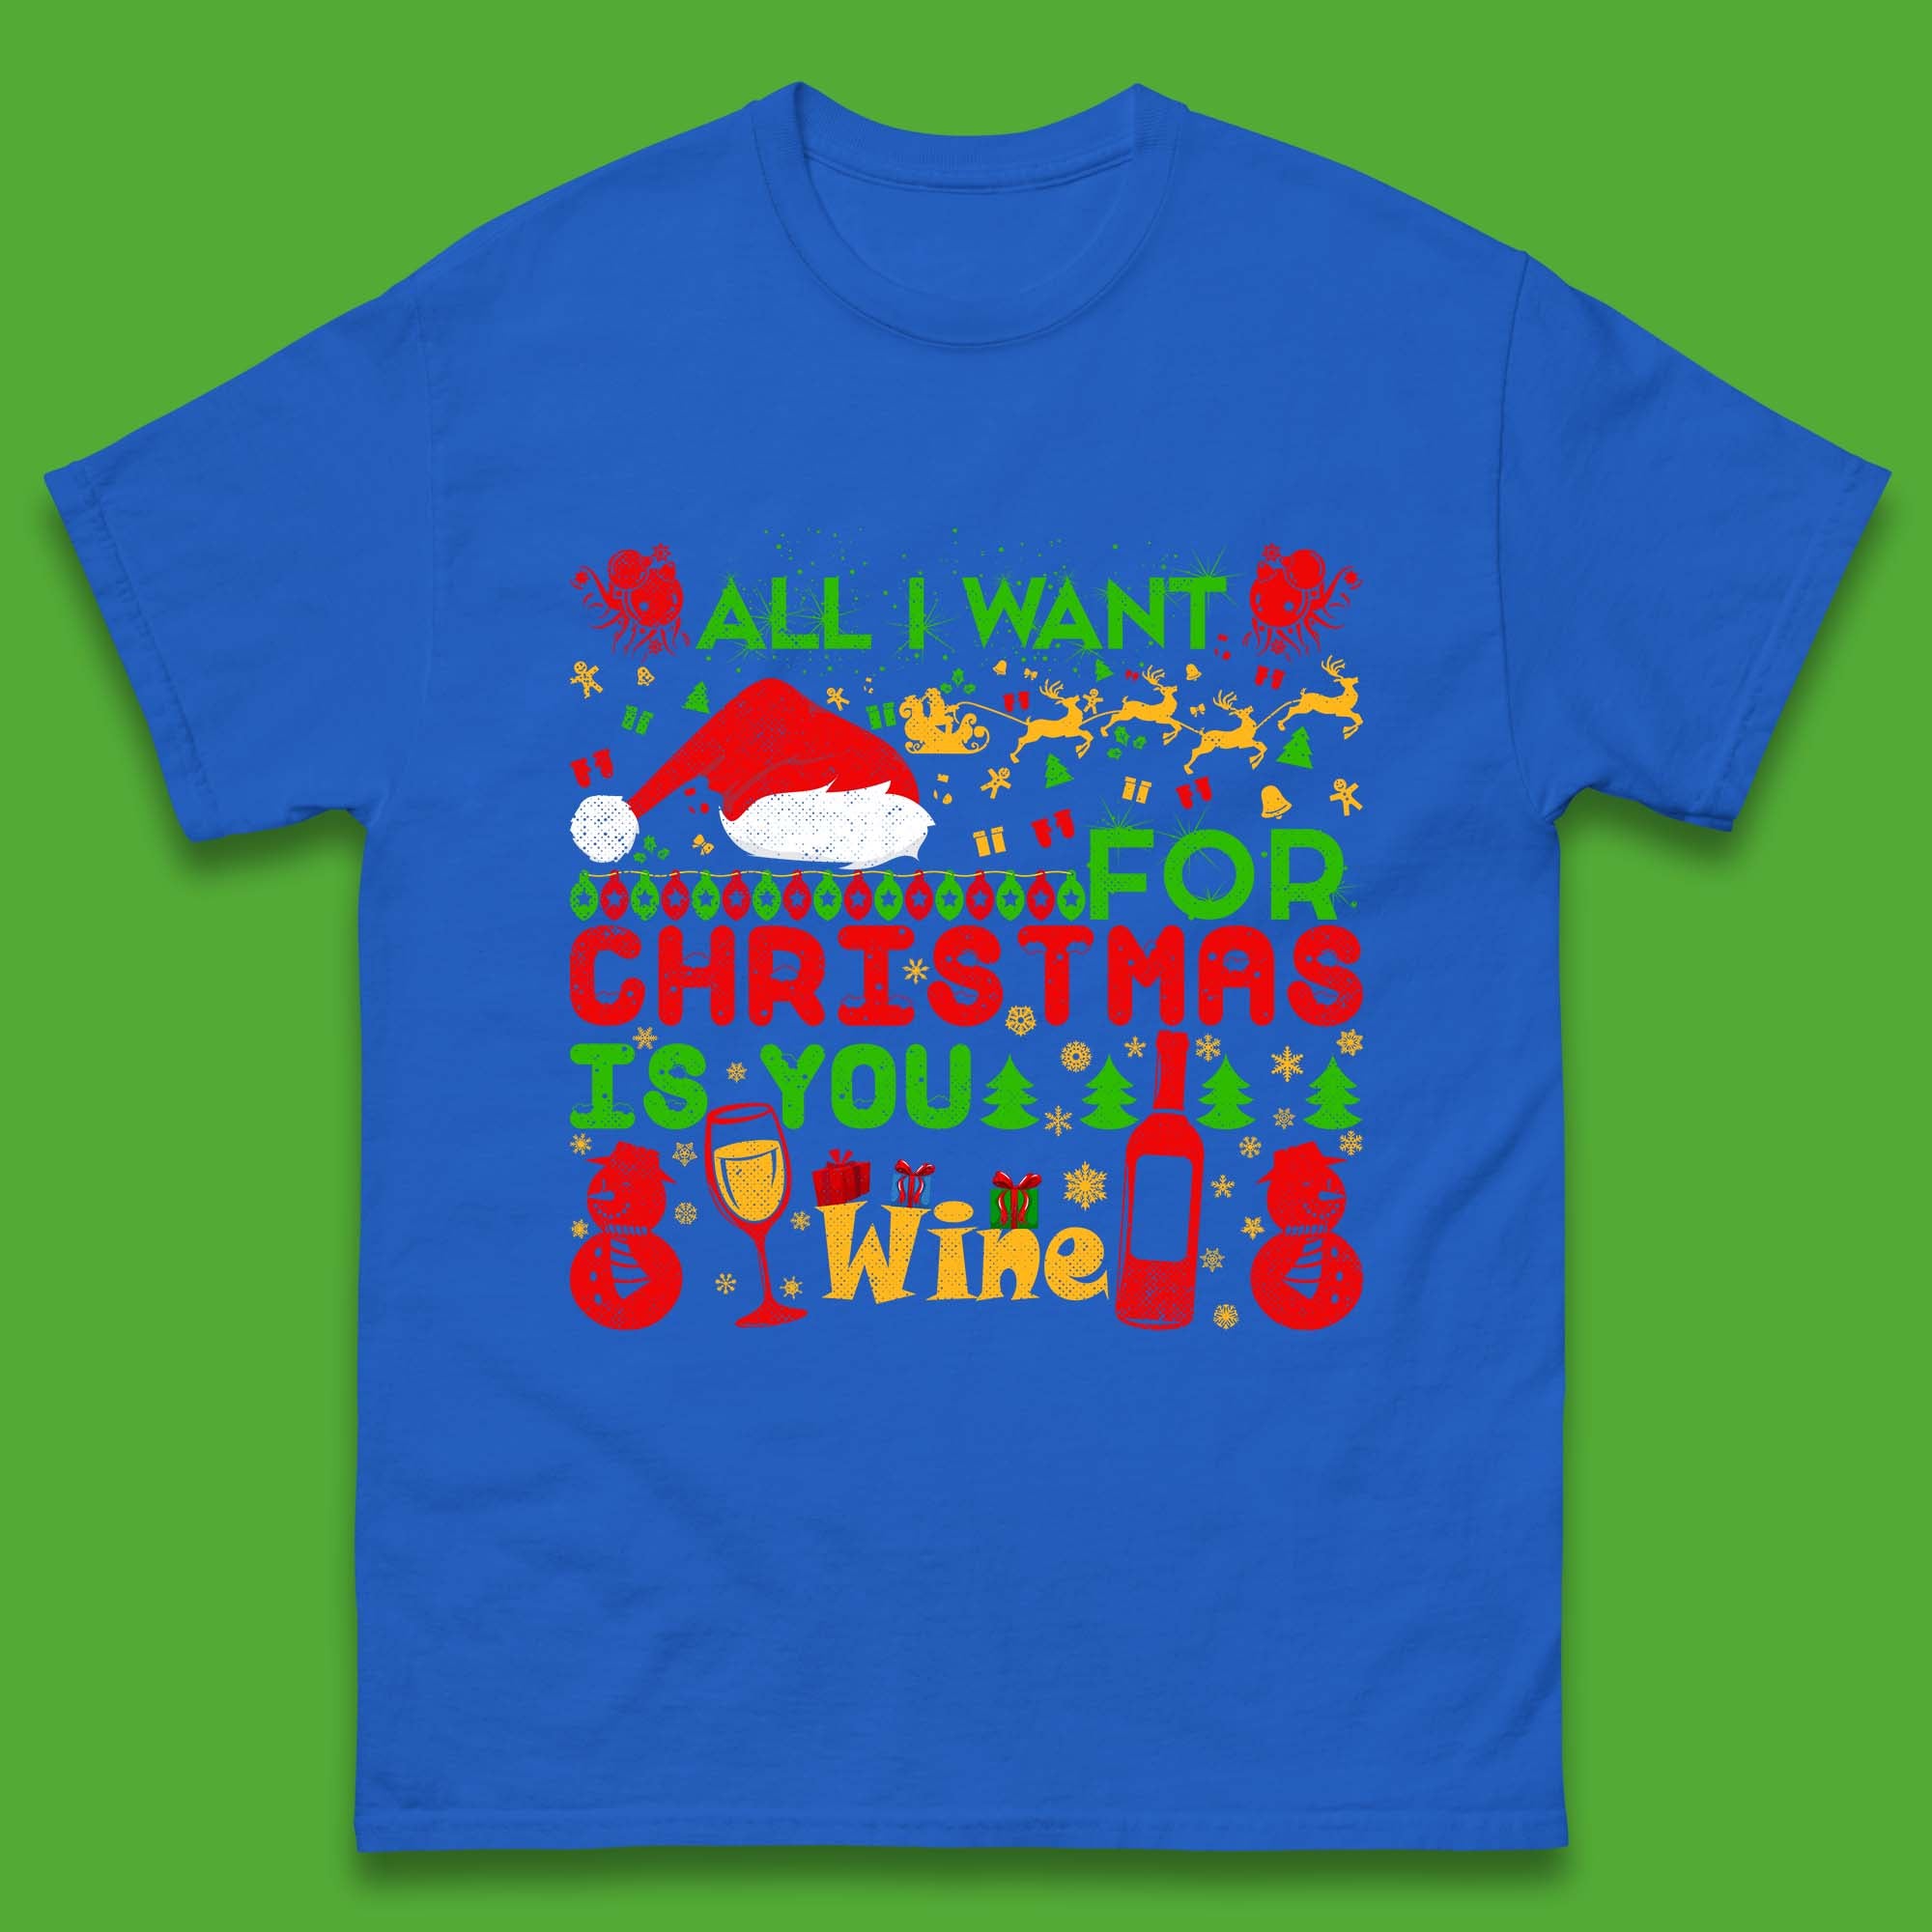 All I Want for Christmas is You T Shirt